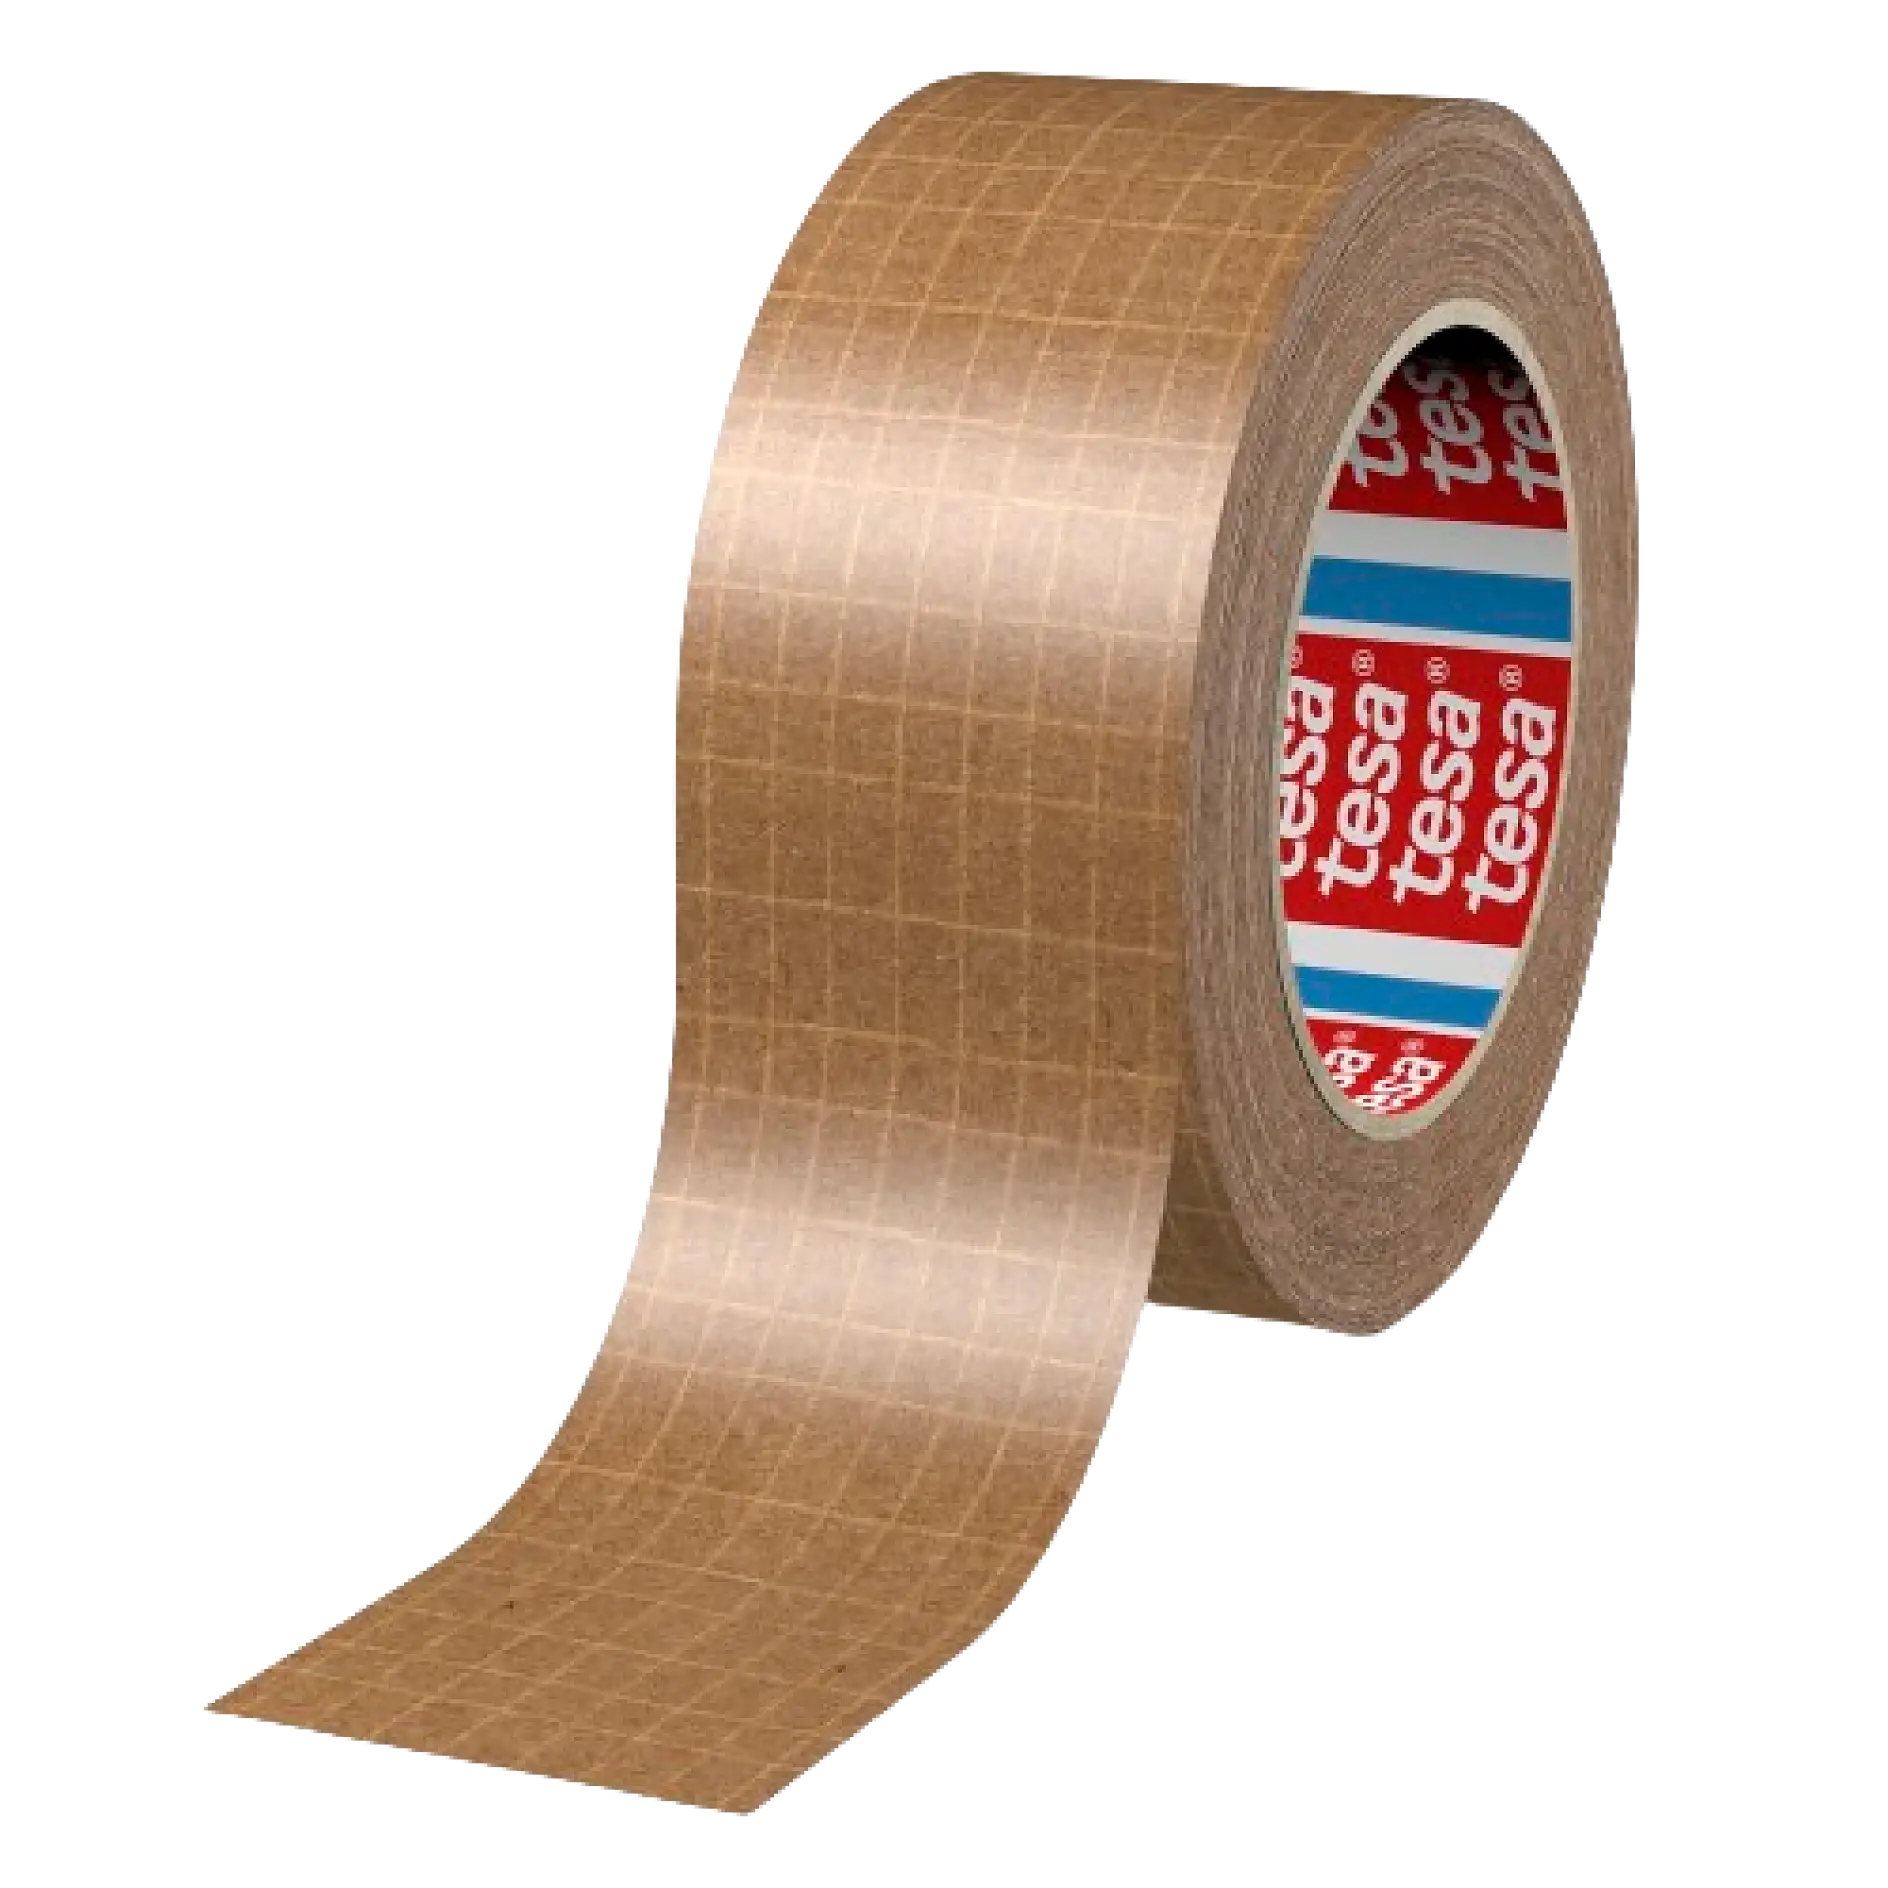 tesa-60013-self-adhesive-reinforced-paper-packaging-tape-chamois-600130000000-pr-cms__1_-removebg-preview (1)